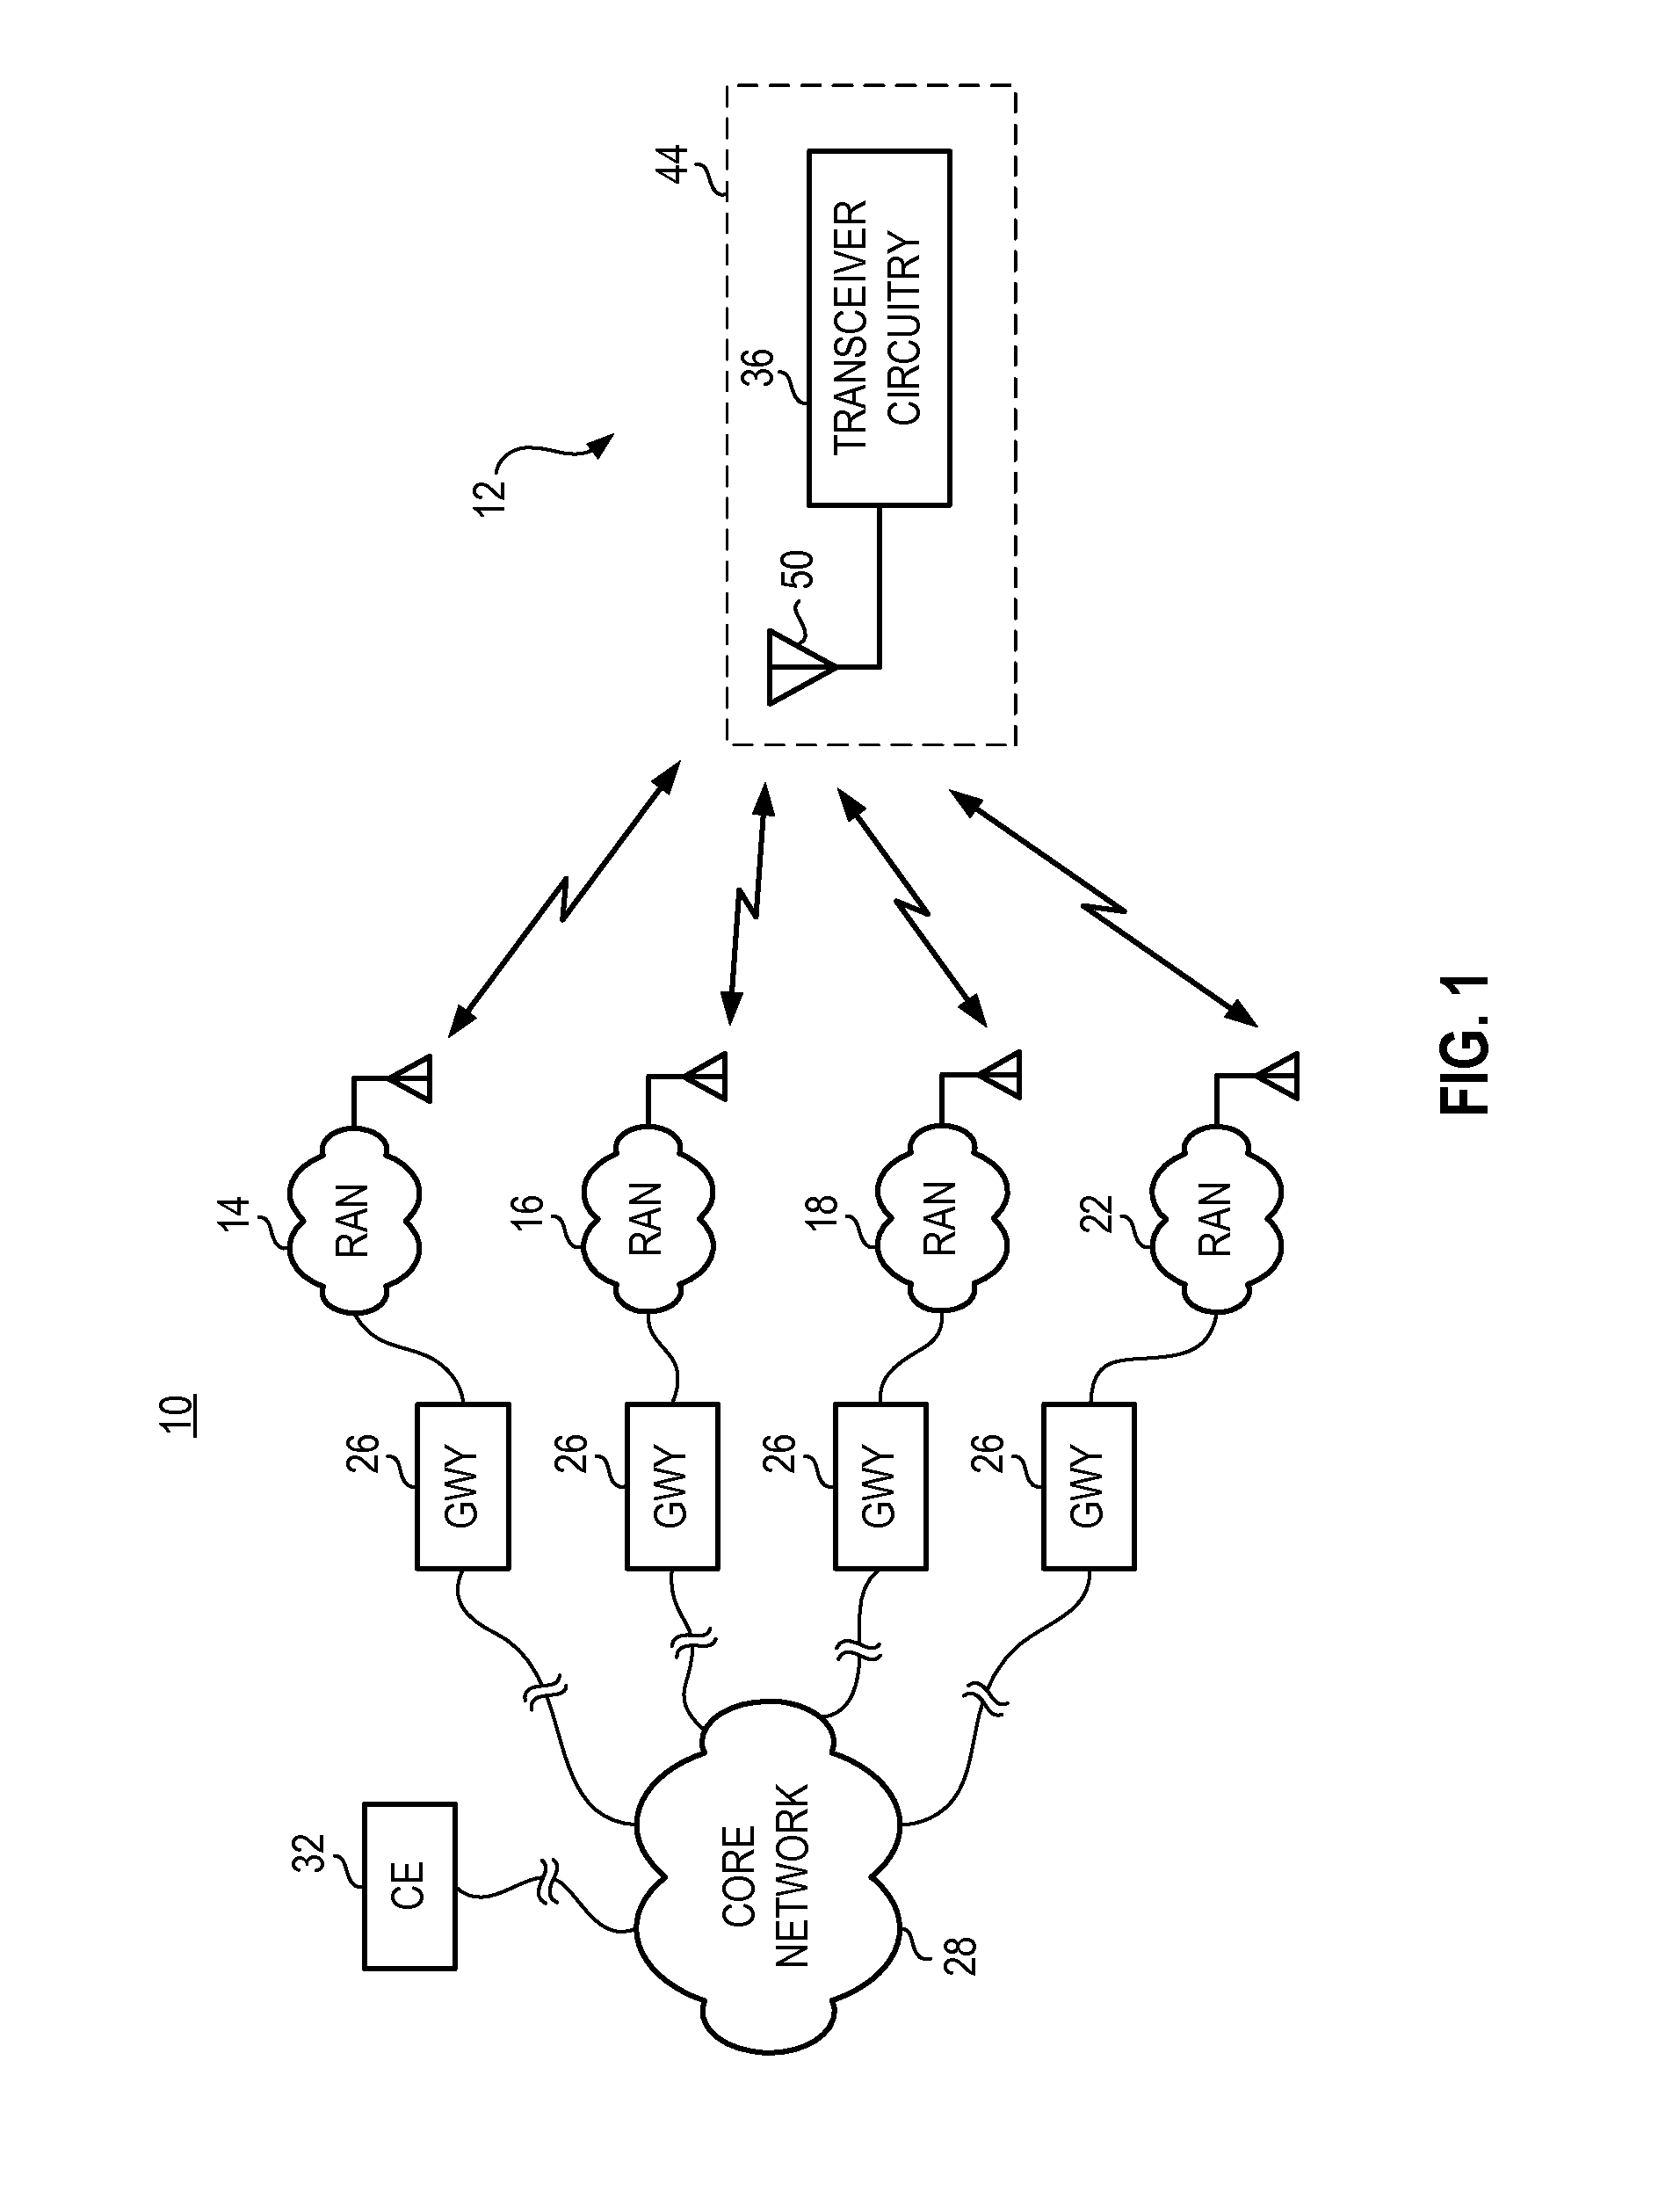 Multi-band antenna apparatus disposed on a three-dimensional substrate, and associated methodology, for a radio device